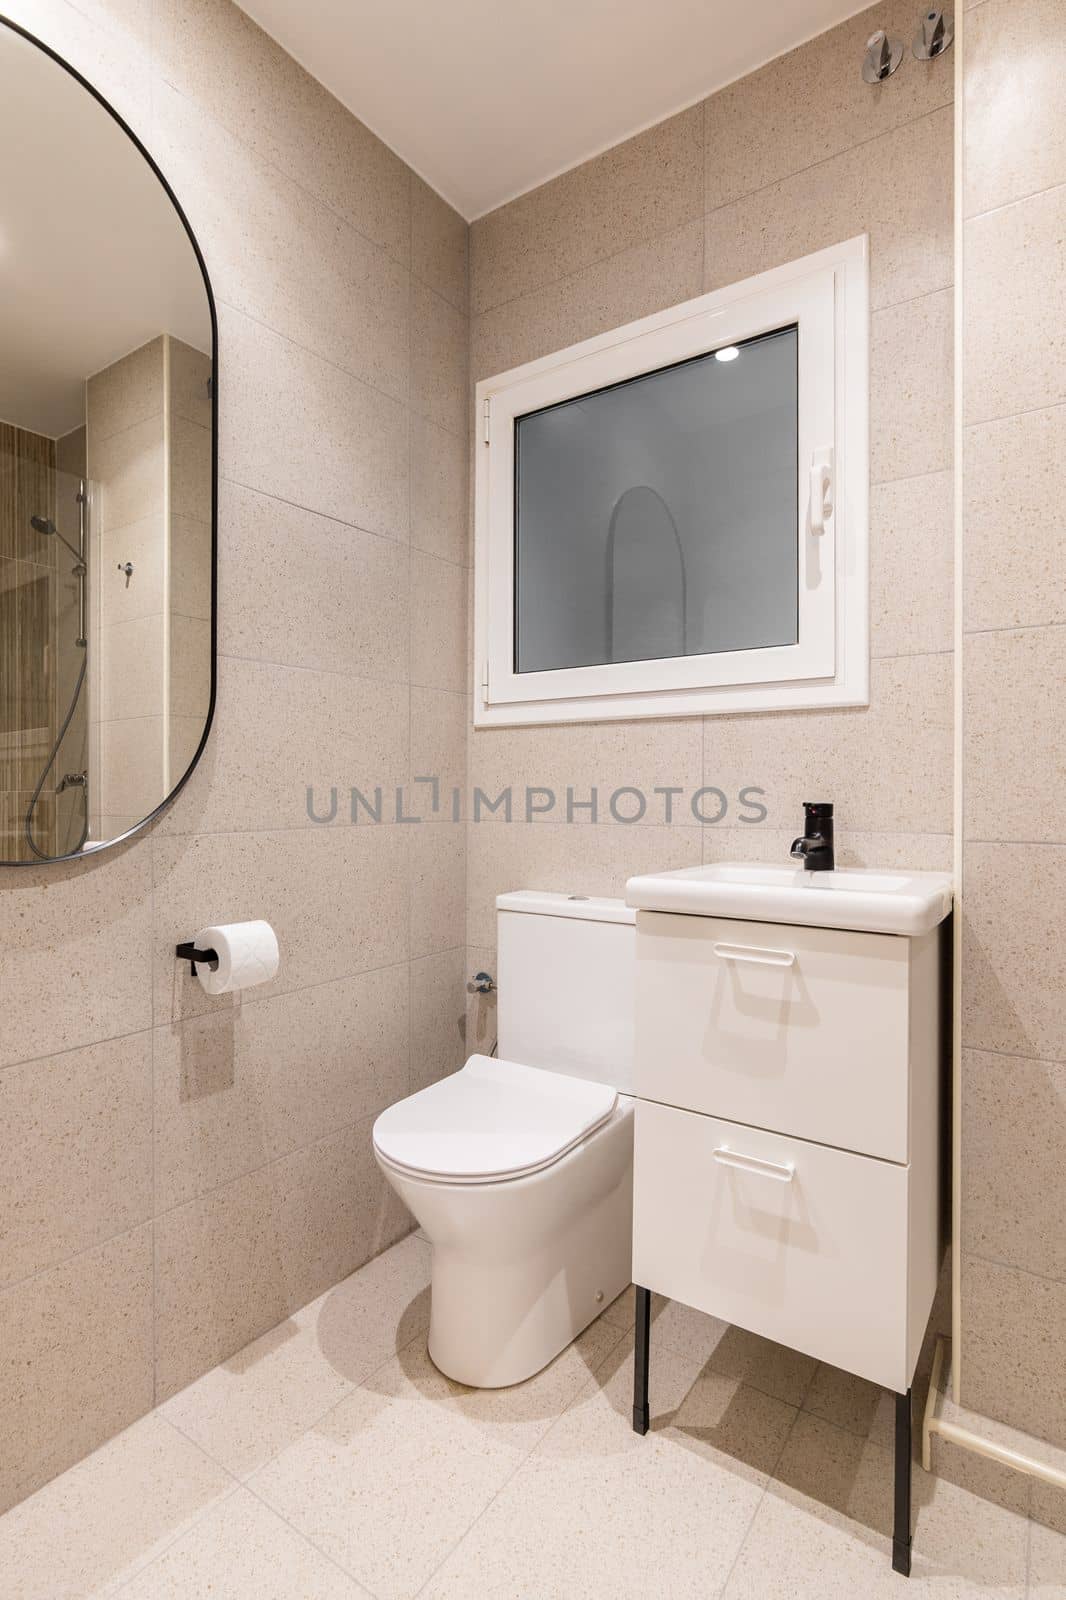 Part of bathroom with toilet bowl, washbasin on table, beautiful oval mirror on wall lined with beige marble tiles, in which you can see reflection of shower area with metal fittings. by apavlin